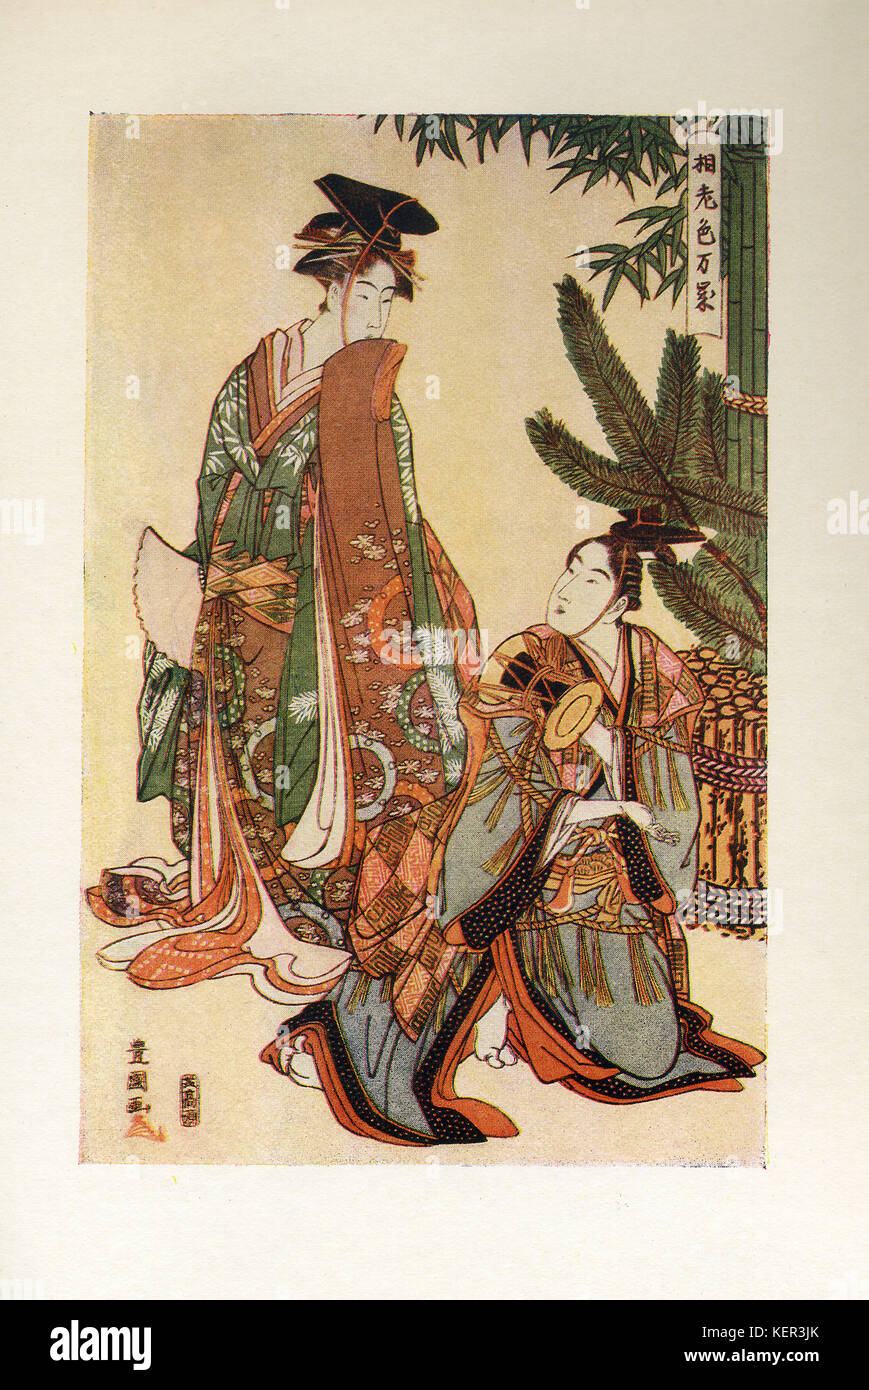 The caption for this image reads: Toyokuni—Manzai (New Year) Dancers.  He was recognized as a master of ukiyo-e and he was especially known for his kabuki actor prints. He lived 1769 to 1825. The ukiyo-e style was popular between the 17th and 19th centuries.  The term translates as "picture[s] of the floating world." There were wood prints, as well as paintings of female beauties actors, sumo wrestlers, historical scenes, folk tales, travel, landscape, flowers. Stock Photo